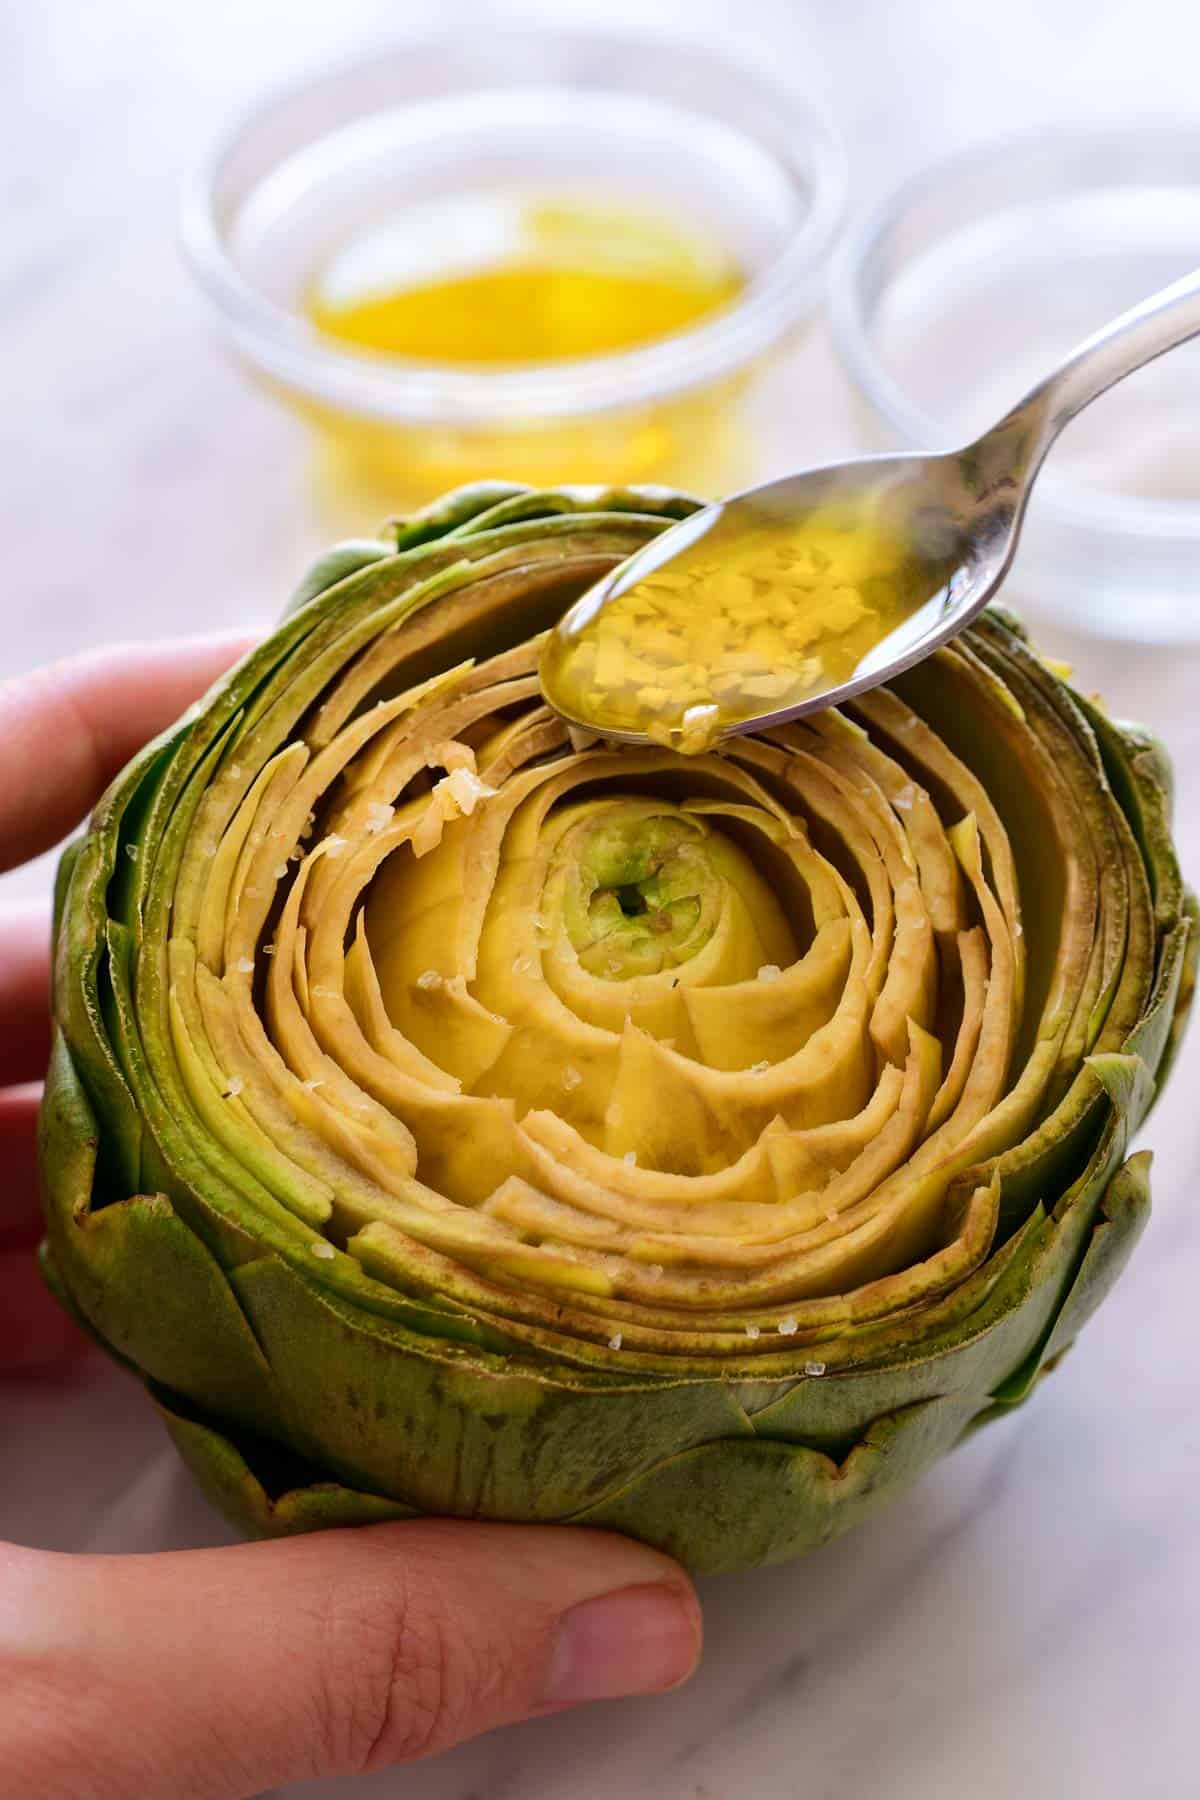 A spoon drizzling garlic oil over the top of an artichoke.